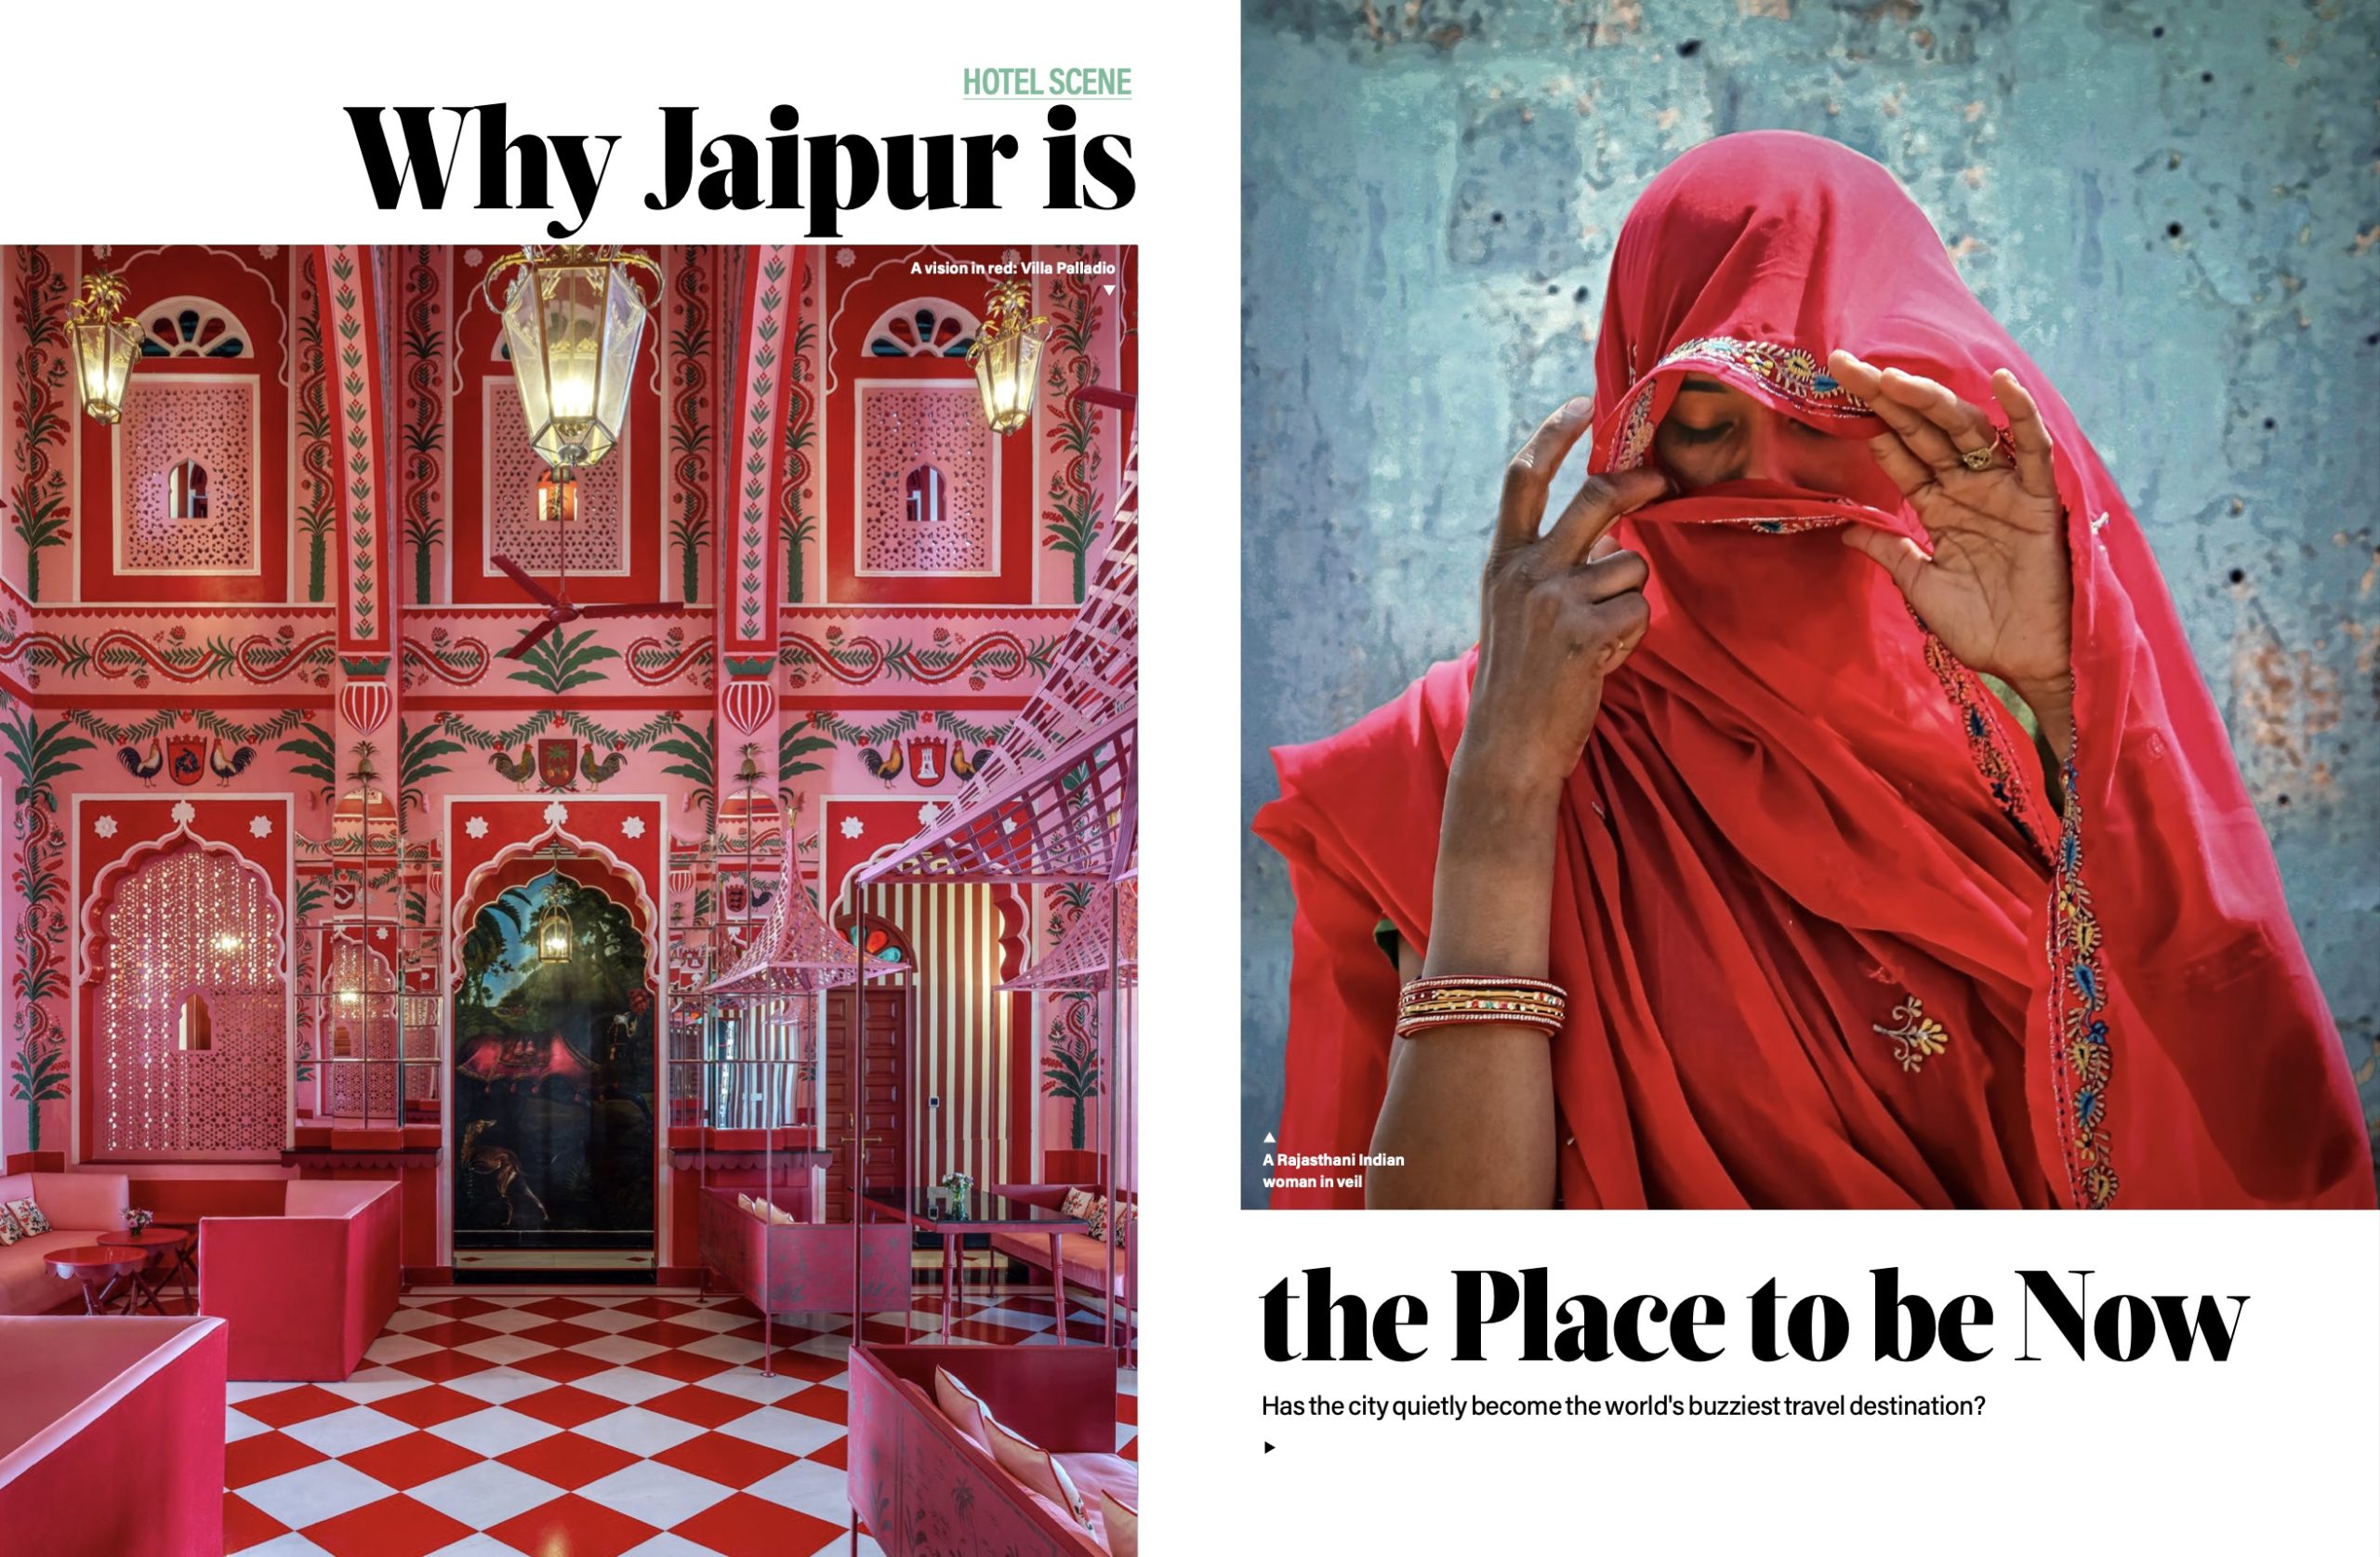 List: Why Jaipur Is the Place to Be